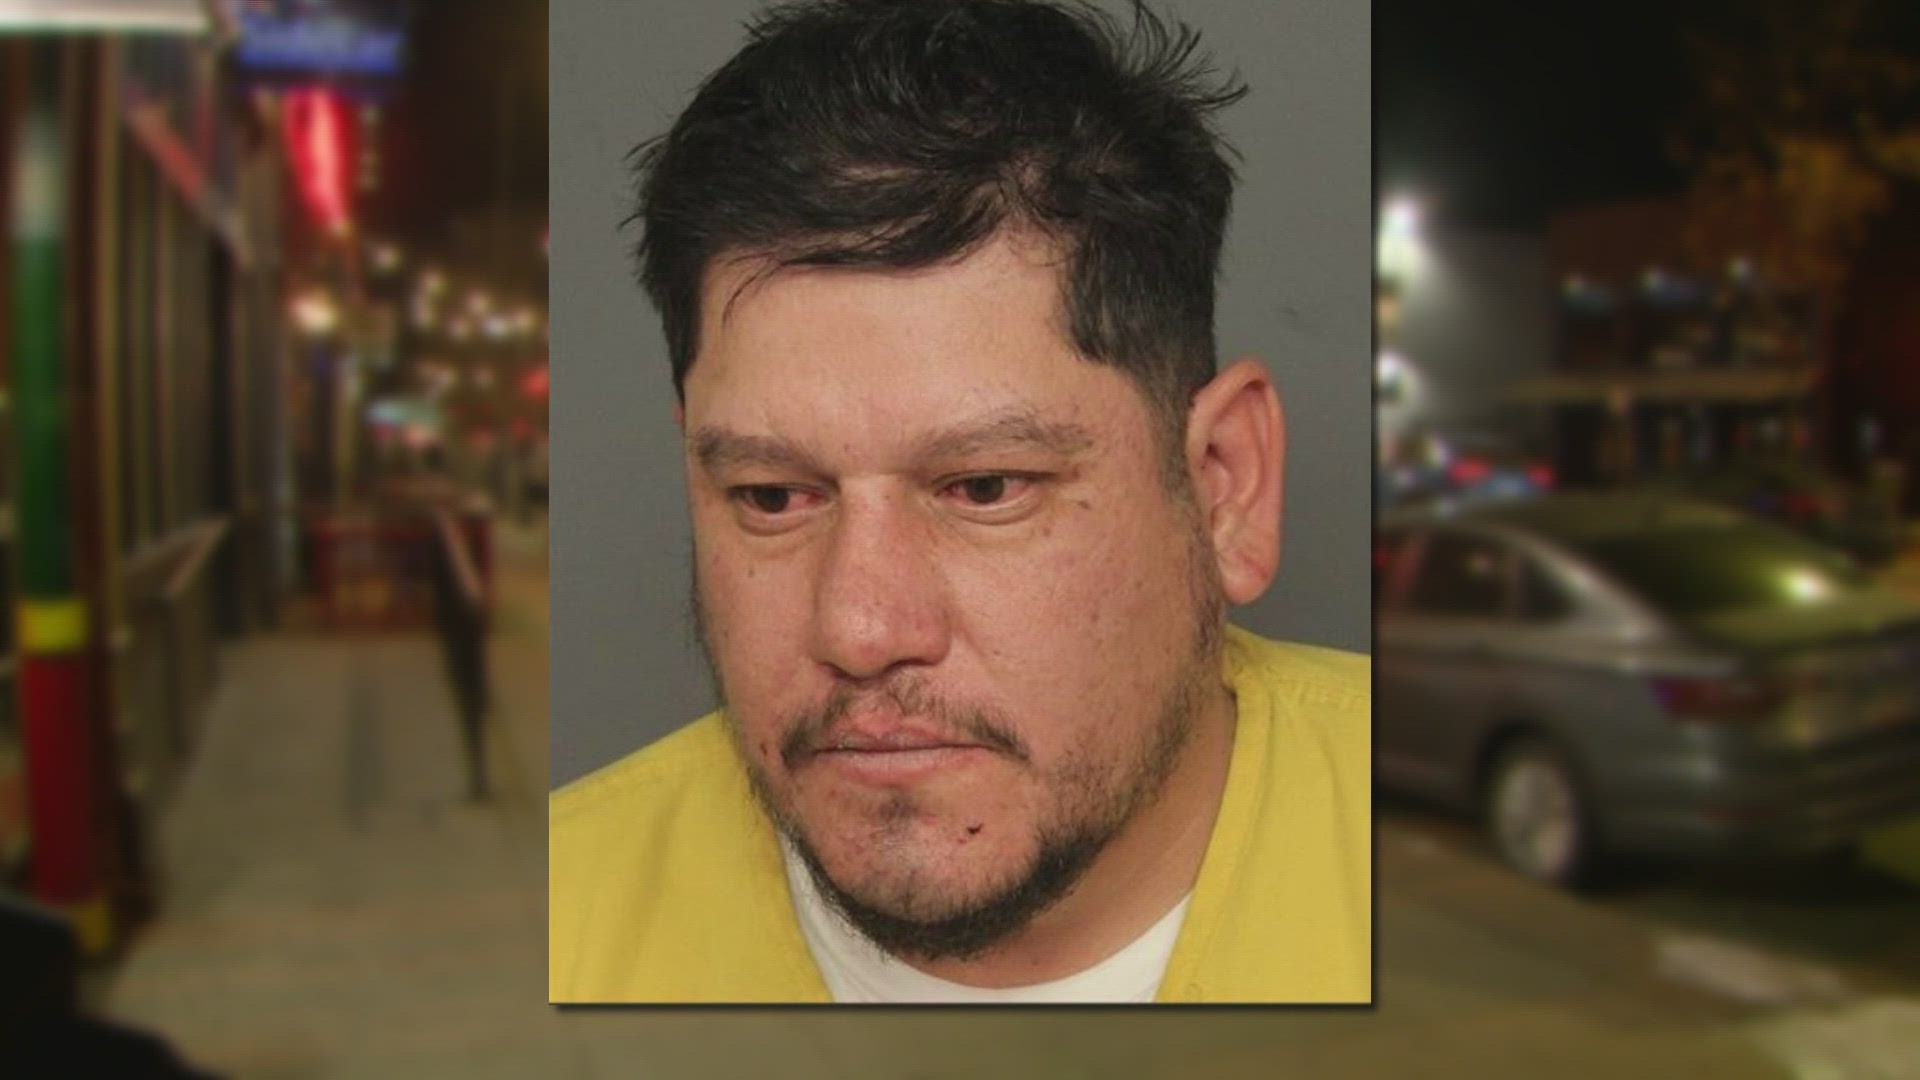 Adrian Alamillo-Gonzales is accused in 2 assaults that happened as bars let out in downtown Denver in fall 2022 and spring 2023, according to DPD.